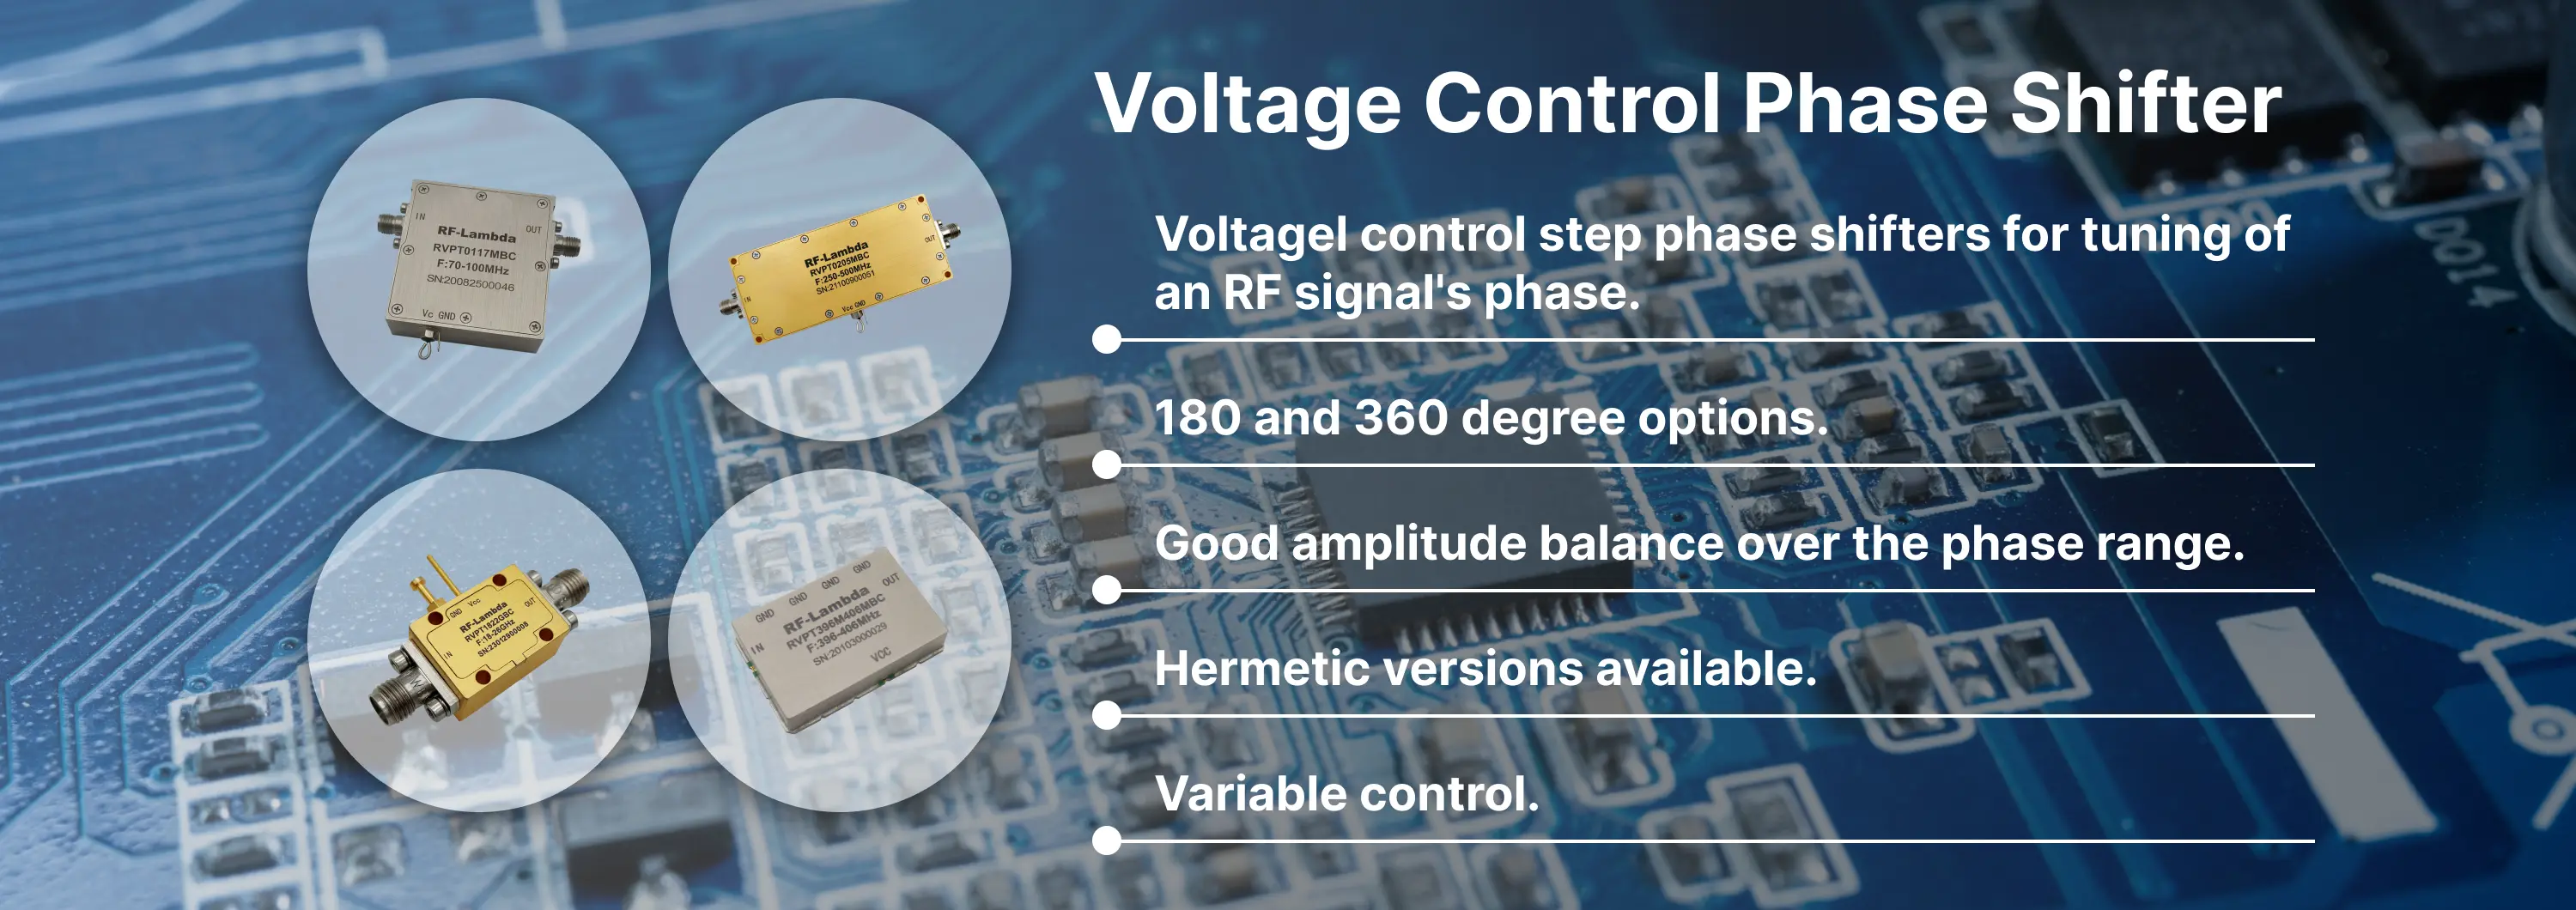 Voltage Control Phase Shifter Banner